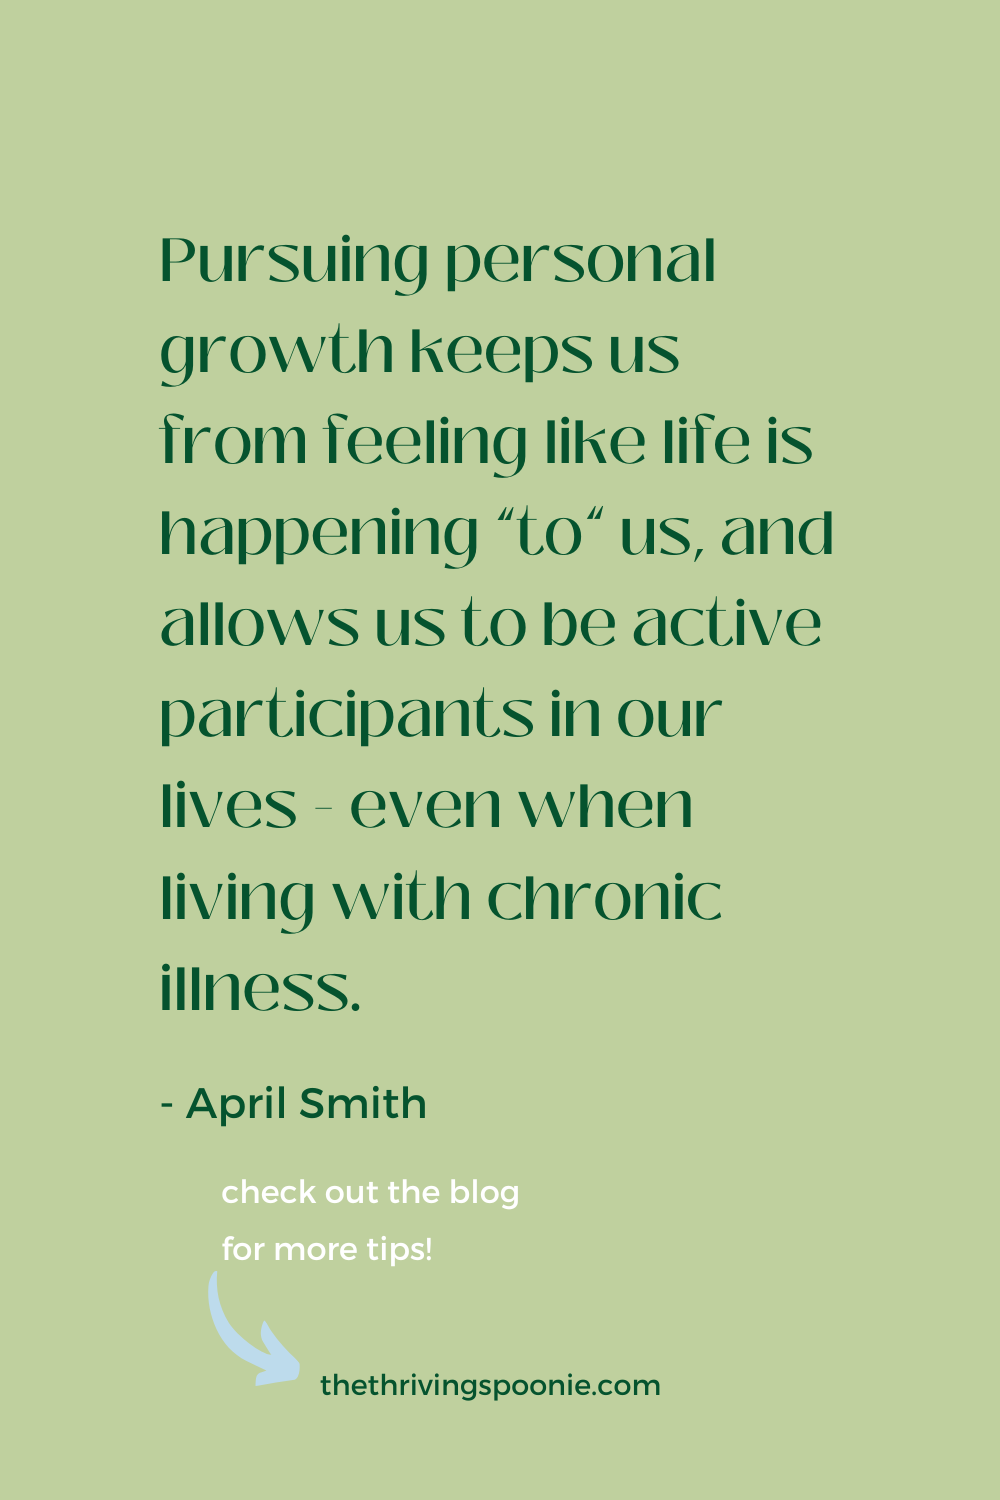 Quote about why personal growth is important for the chronically ill